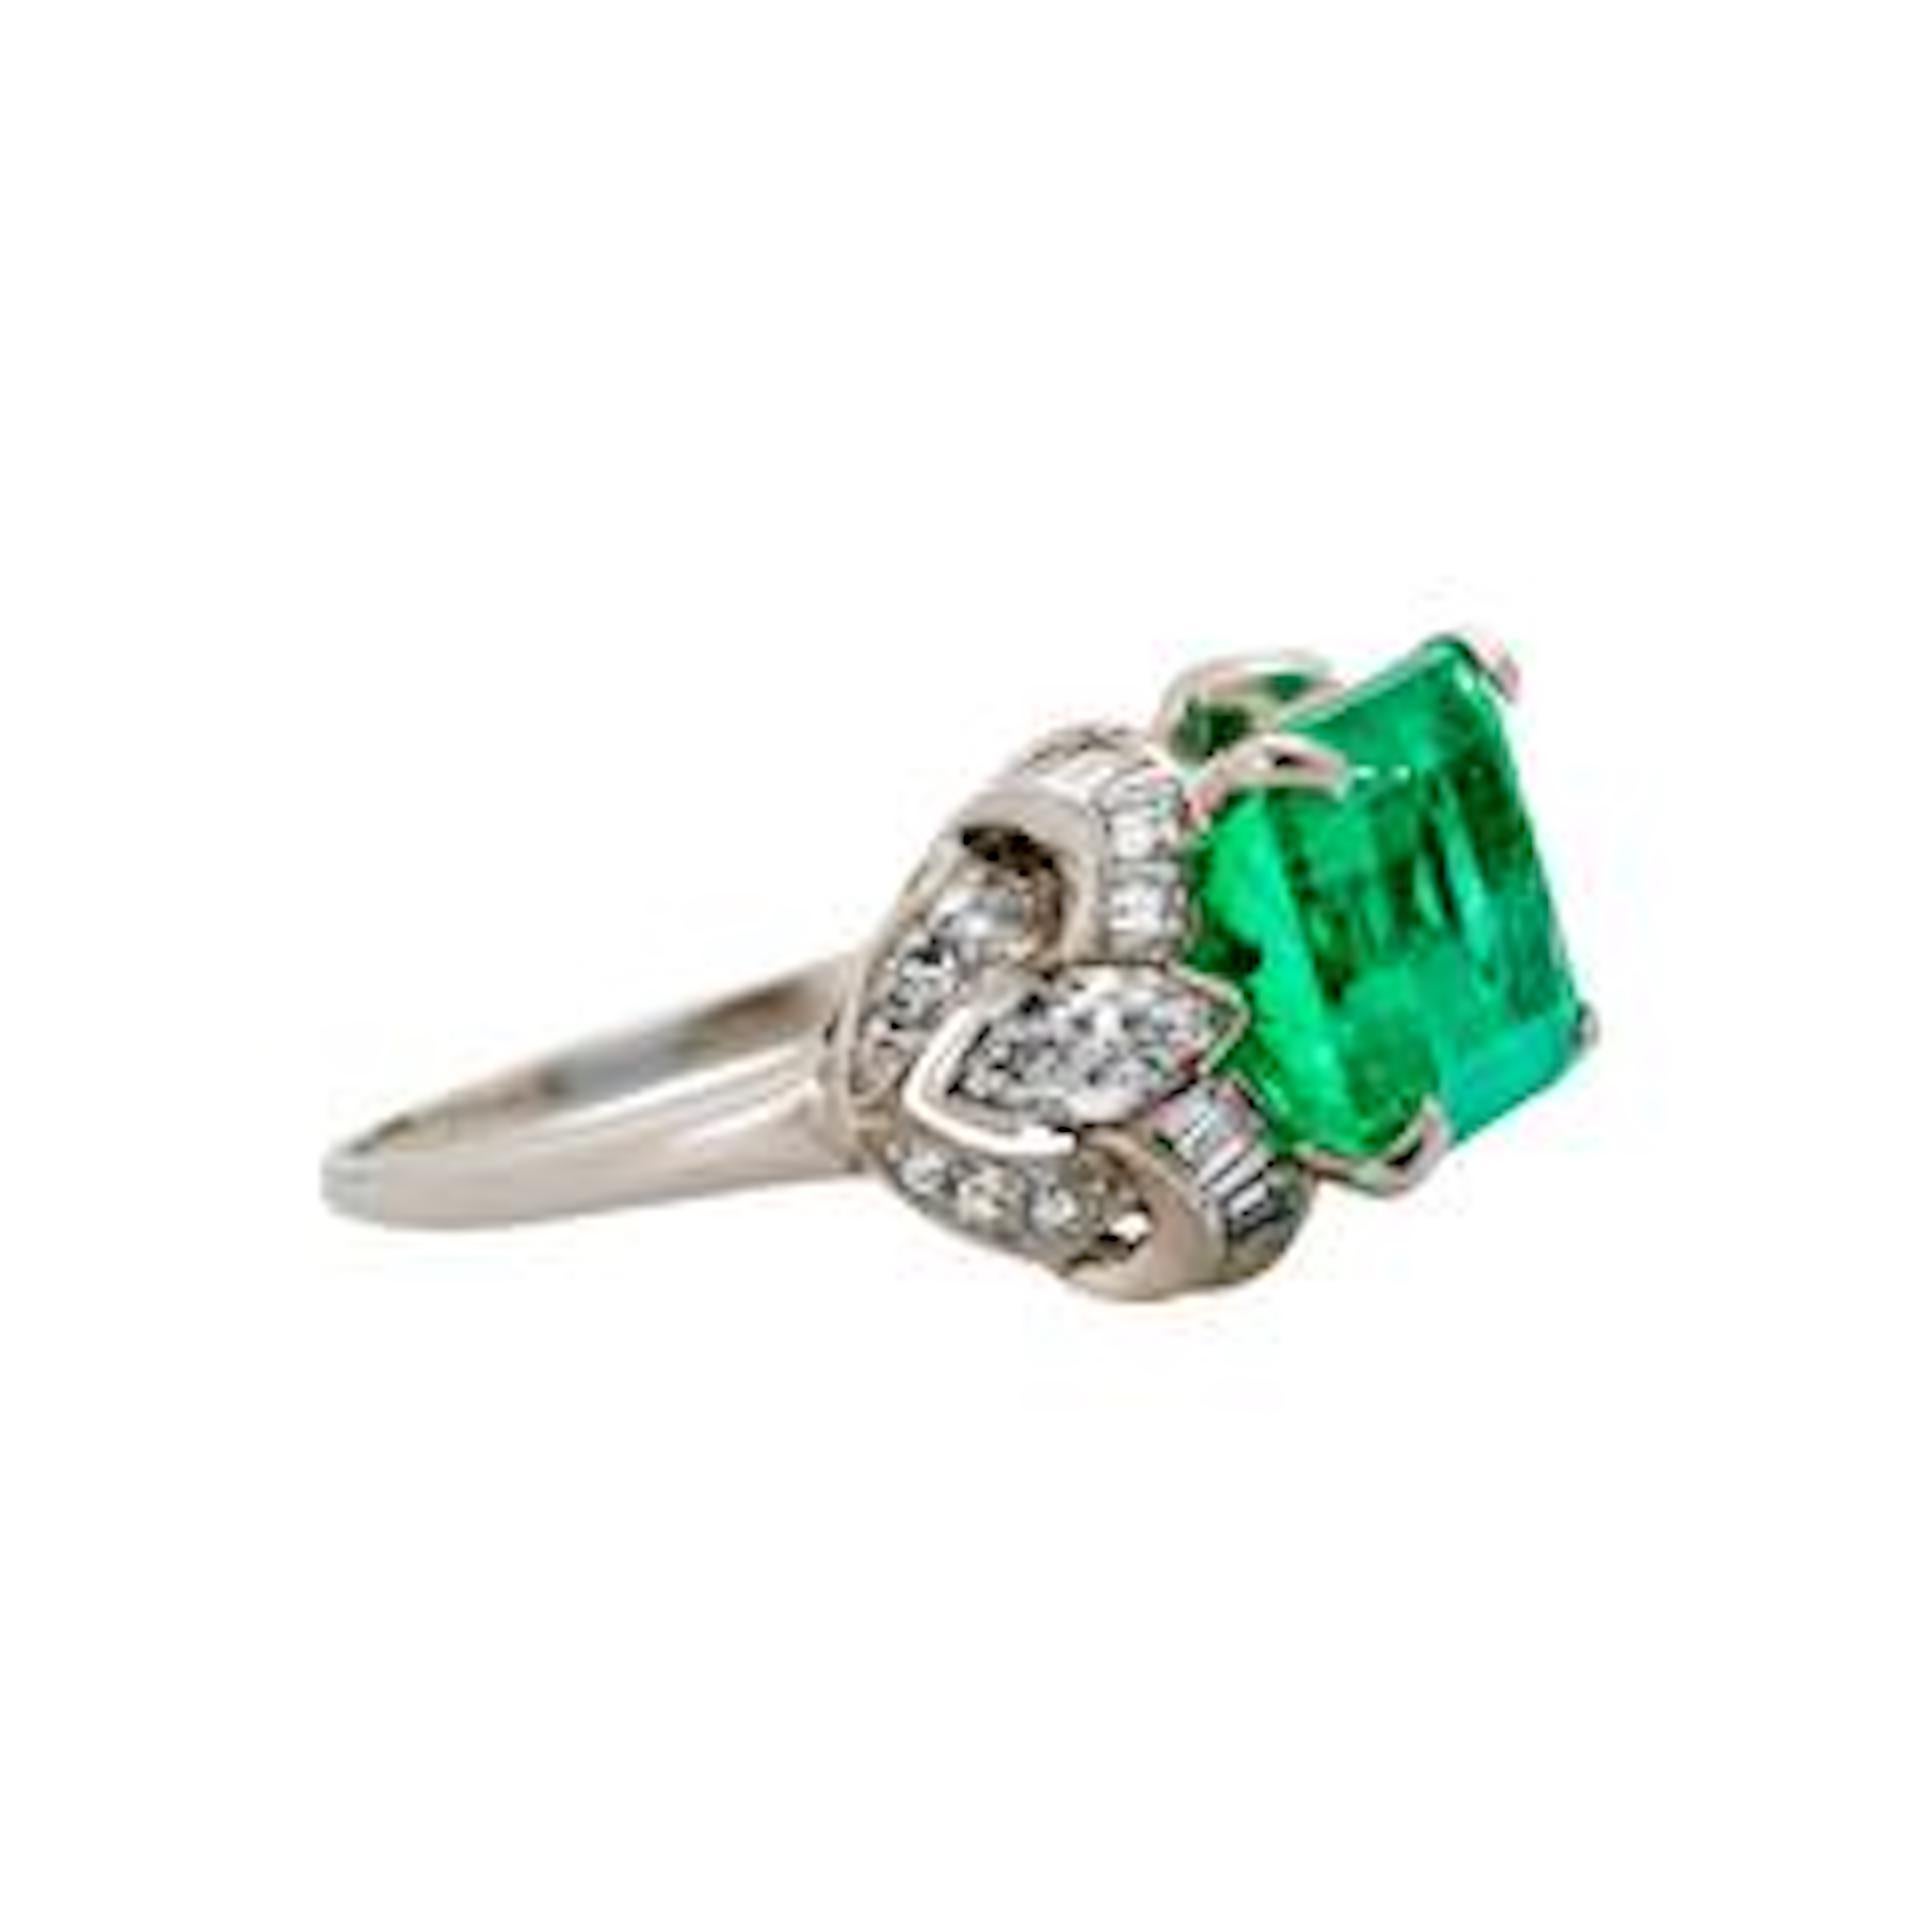 Kentshire is a spectacular platinum, diamond and natural emerald evening ring from the Art Deco era circa 1935. The ring features a magnificent GIA certified 4.97ct Columbian emerald measuring 11.38 x 9.22 x 6.60 mm. The beautiful center stone is